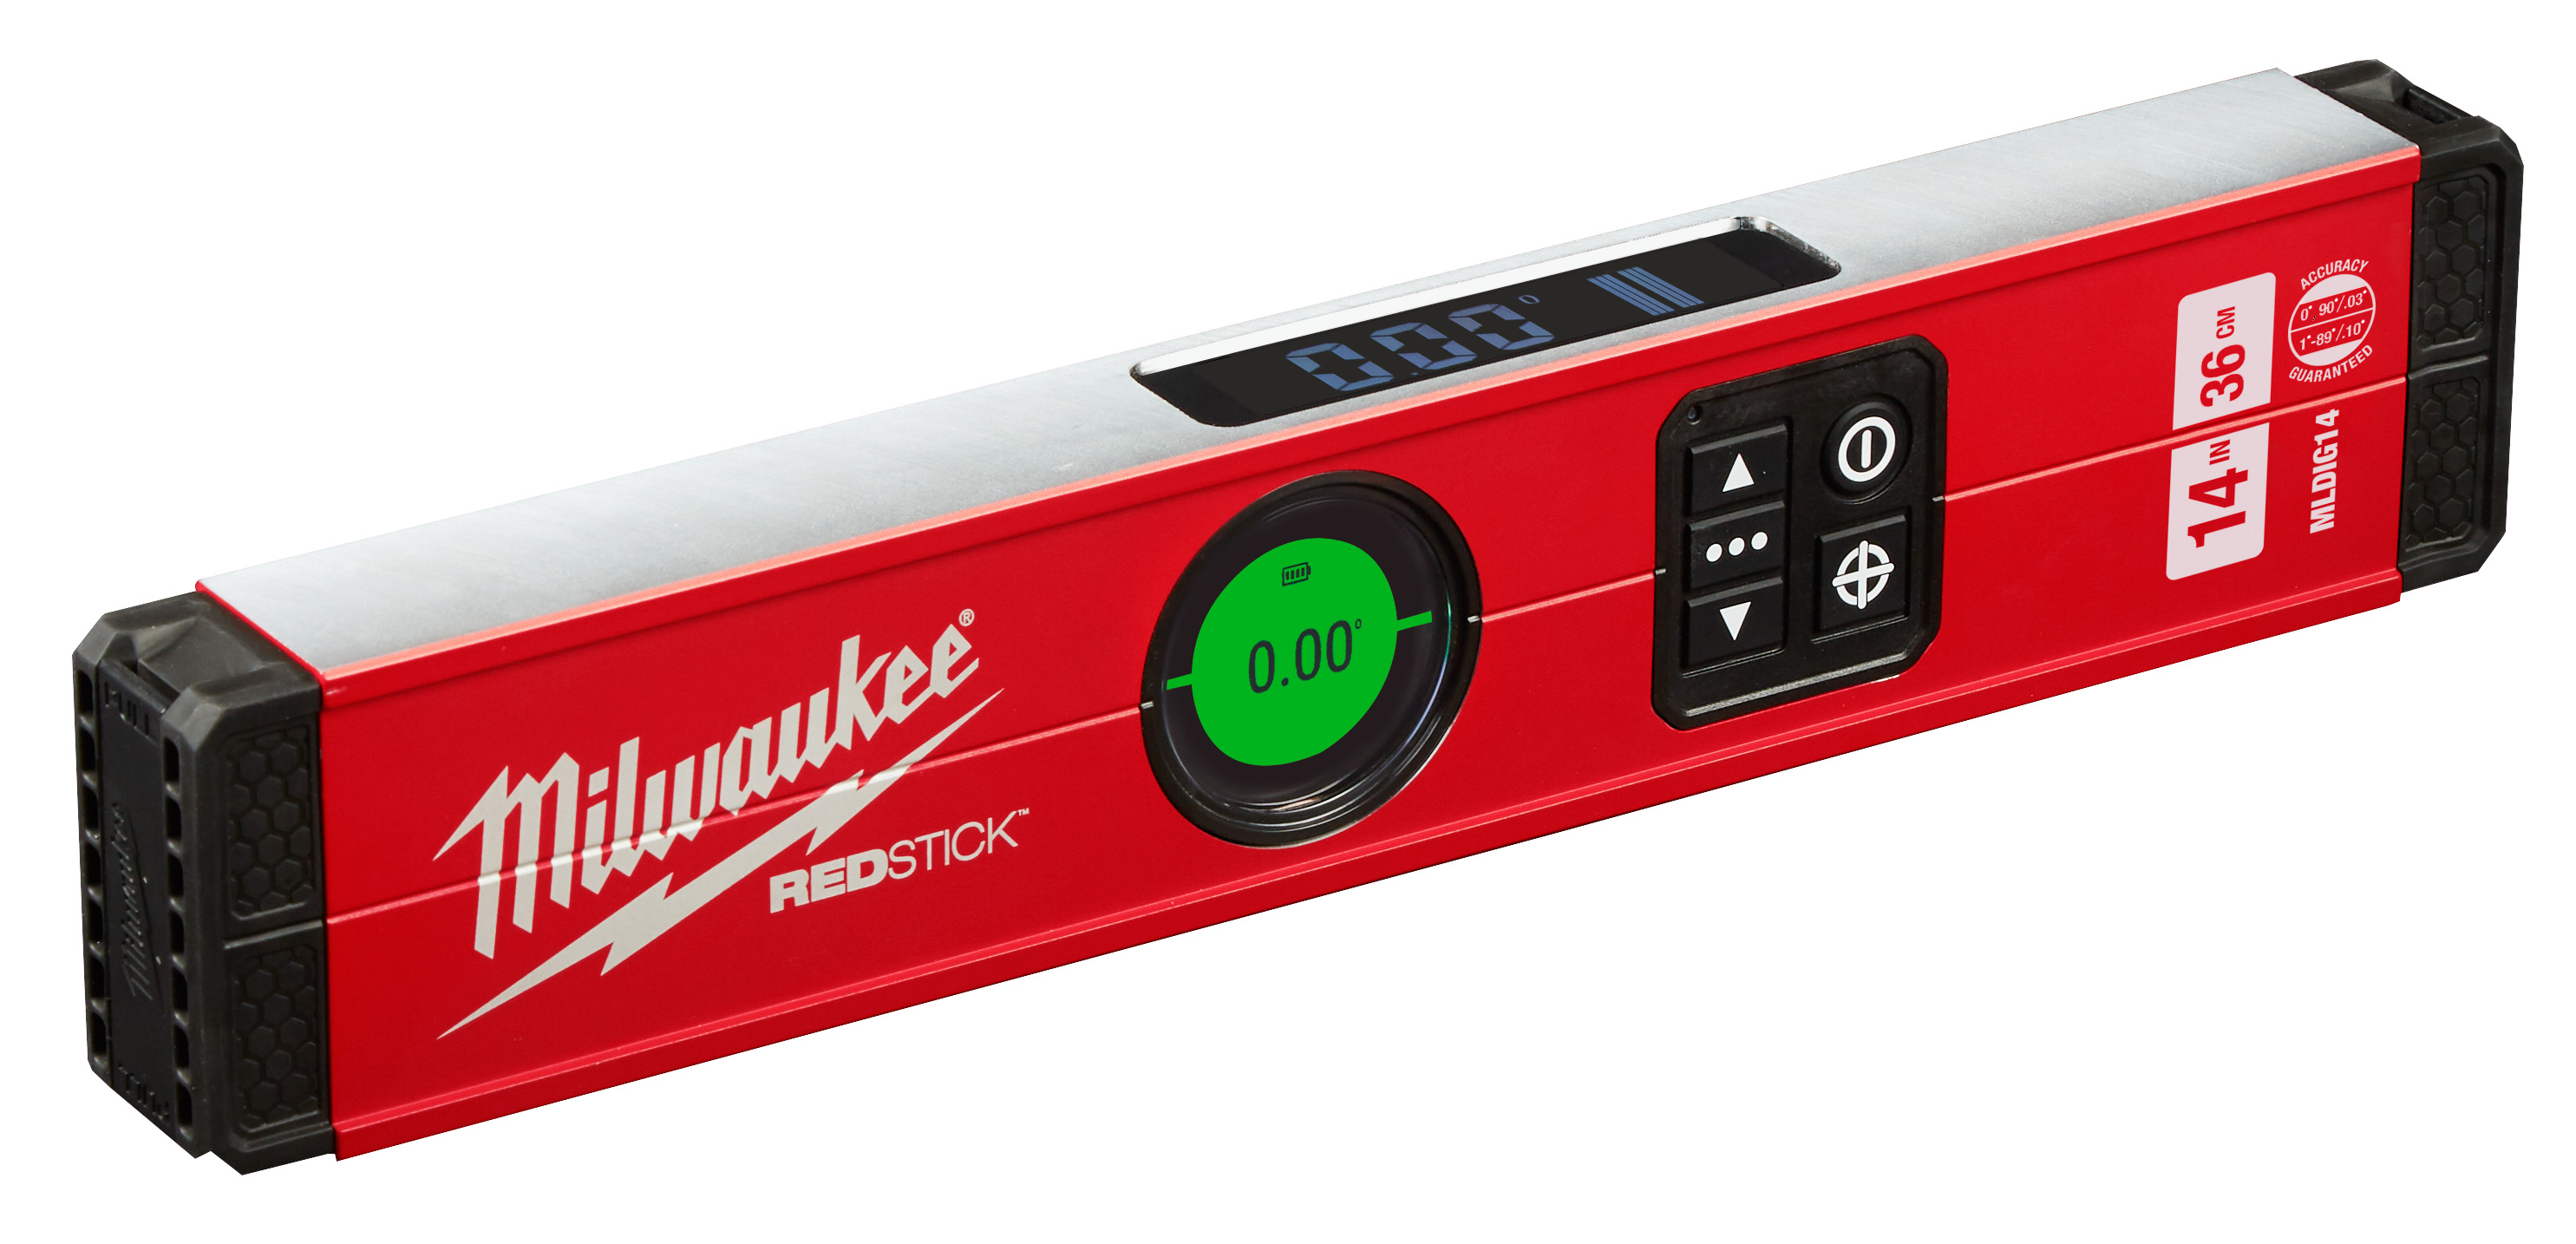 14 in. REDSTICK Digital Level with PINPOINT Measurement Technology